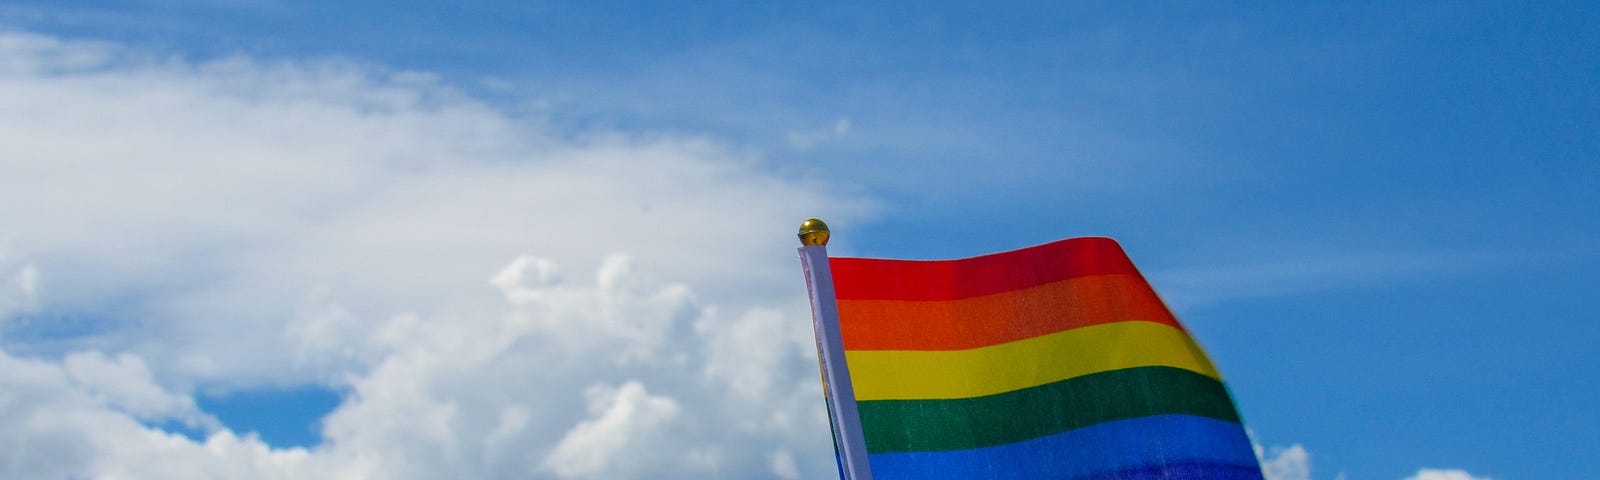 Rainbow flag waving in front of the sky